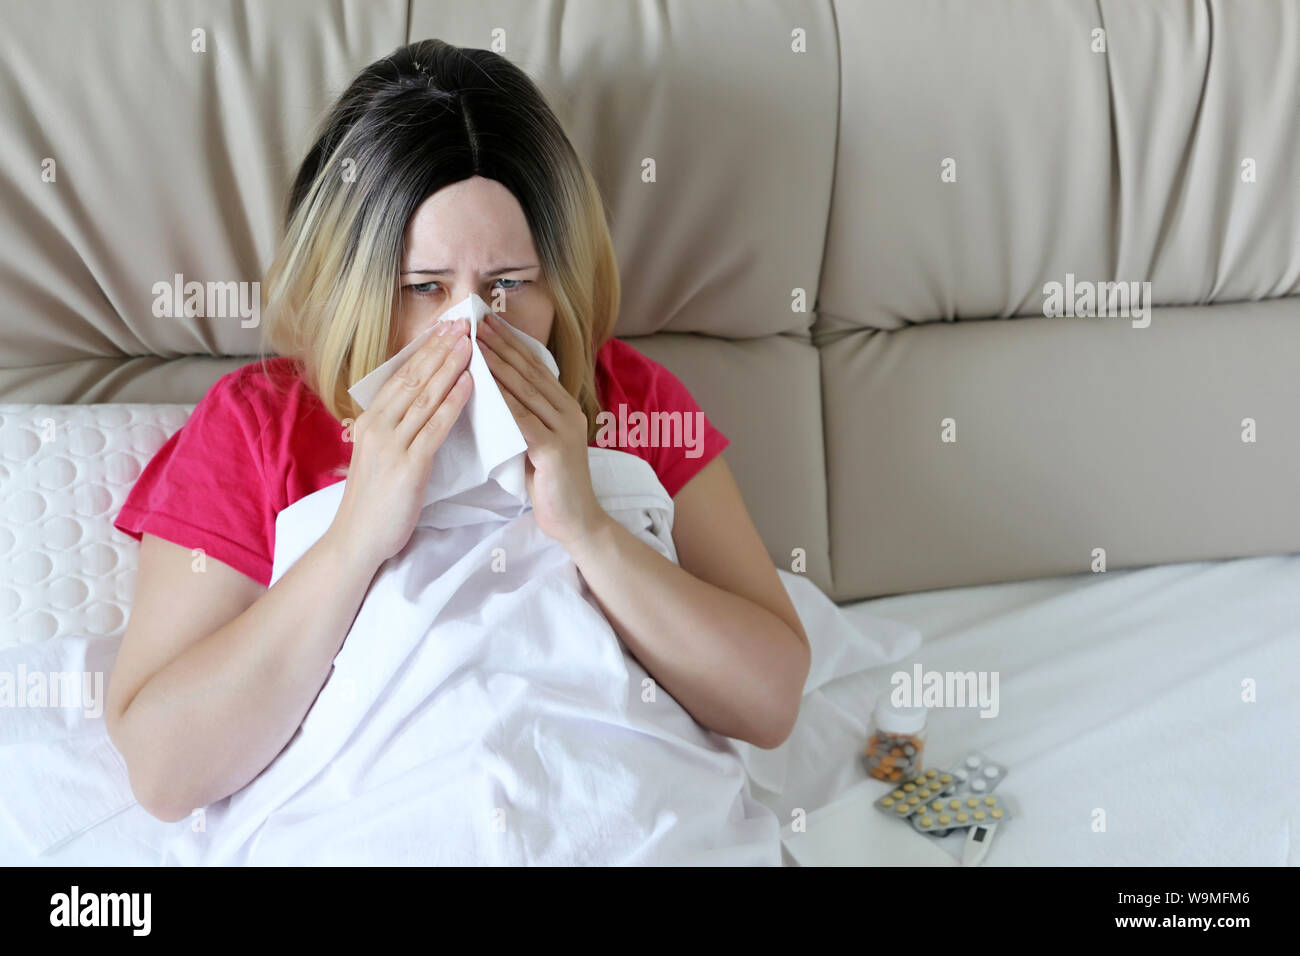 Blonde woman blowing her nose in a handkerchief sitting in a bed. Unhappy girl suffering from runny nose, concept of sick at home, flu, fever Stock Photo